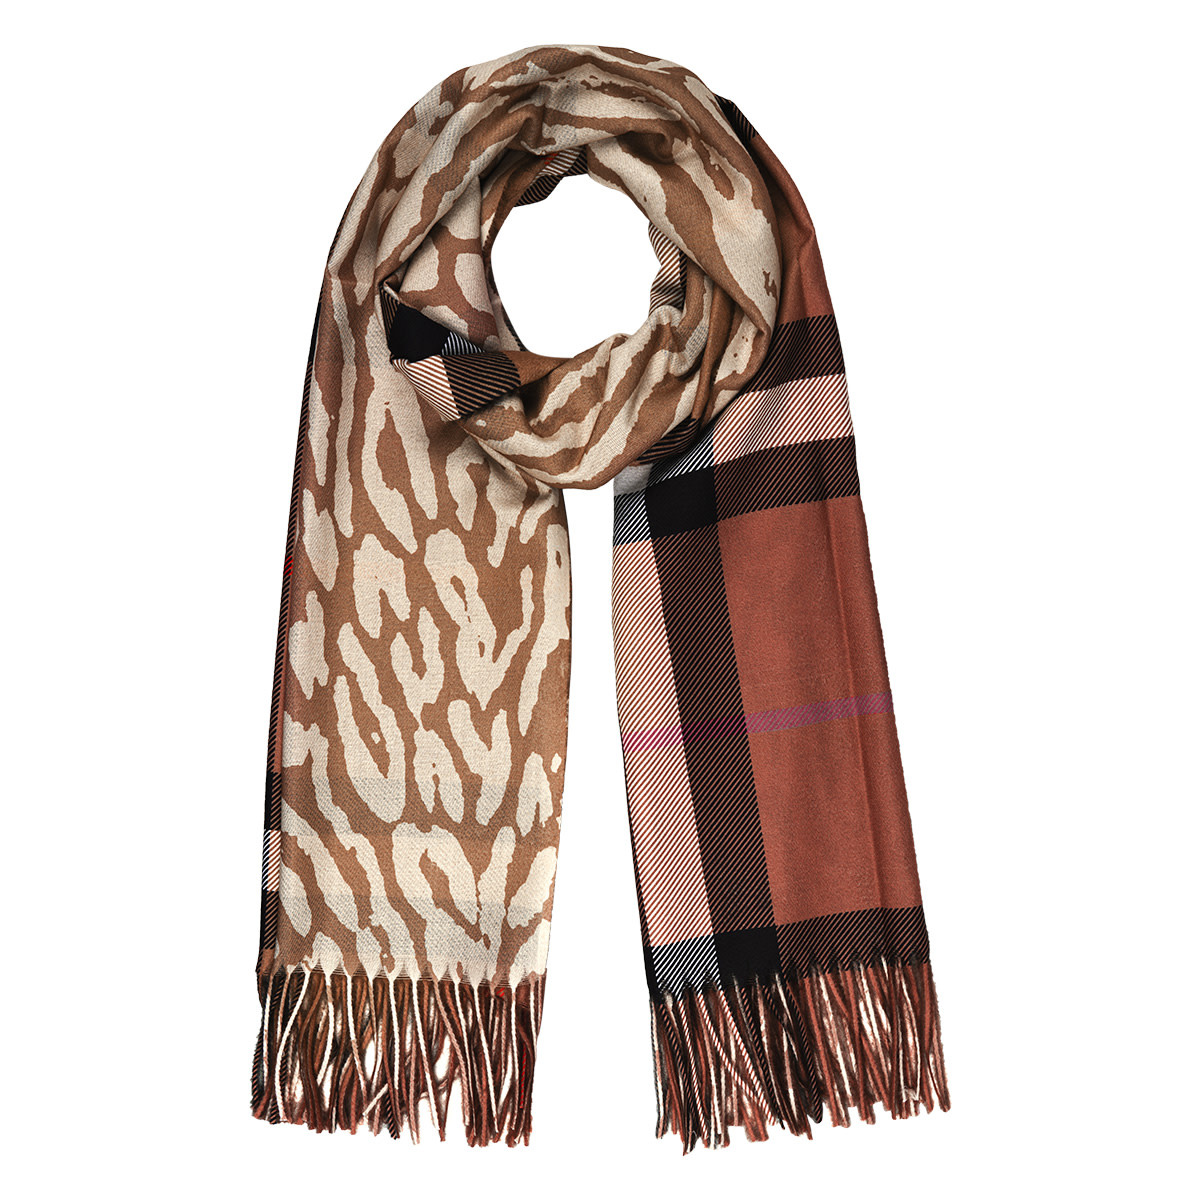 With love Scarf burberry-look brown